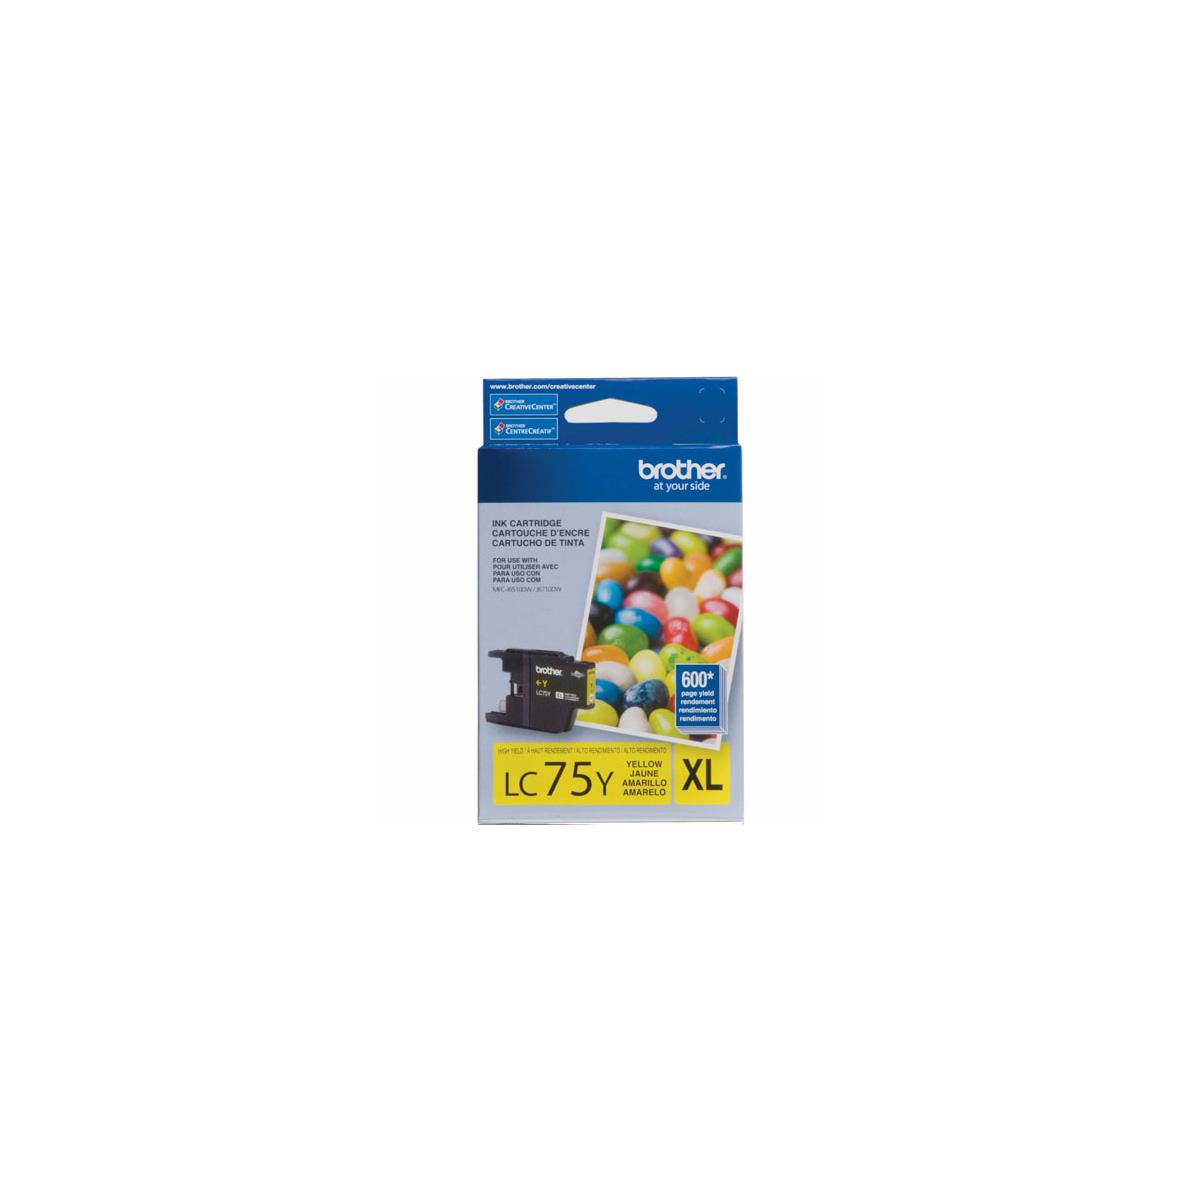 Image of Brother LC75Y Innobella XL High Yield Yellow Ink Cartridge